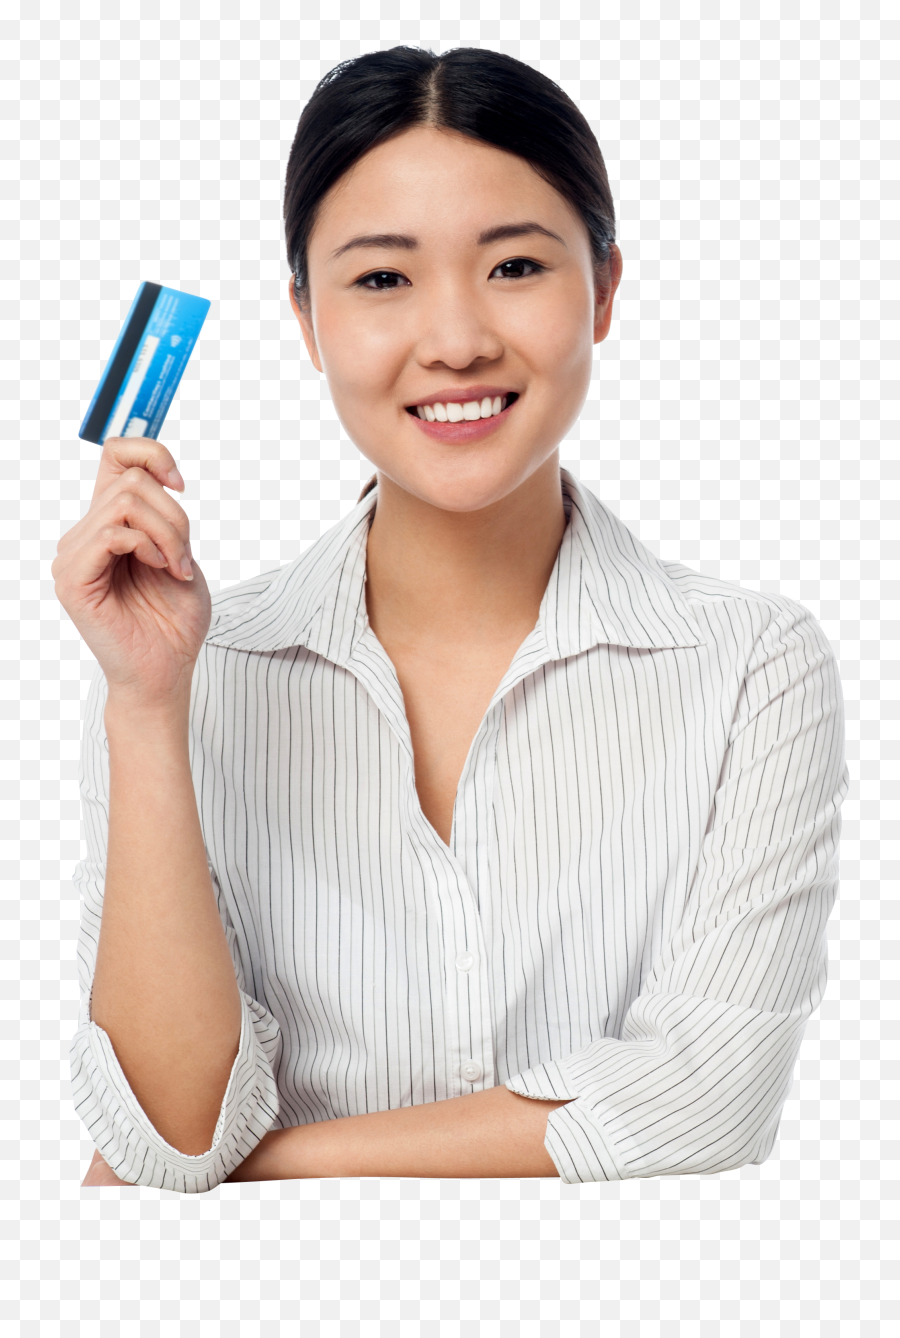 Women Holding Credit Card Png Image - Woman Holding A Credit Card,Credit Card Png